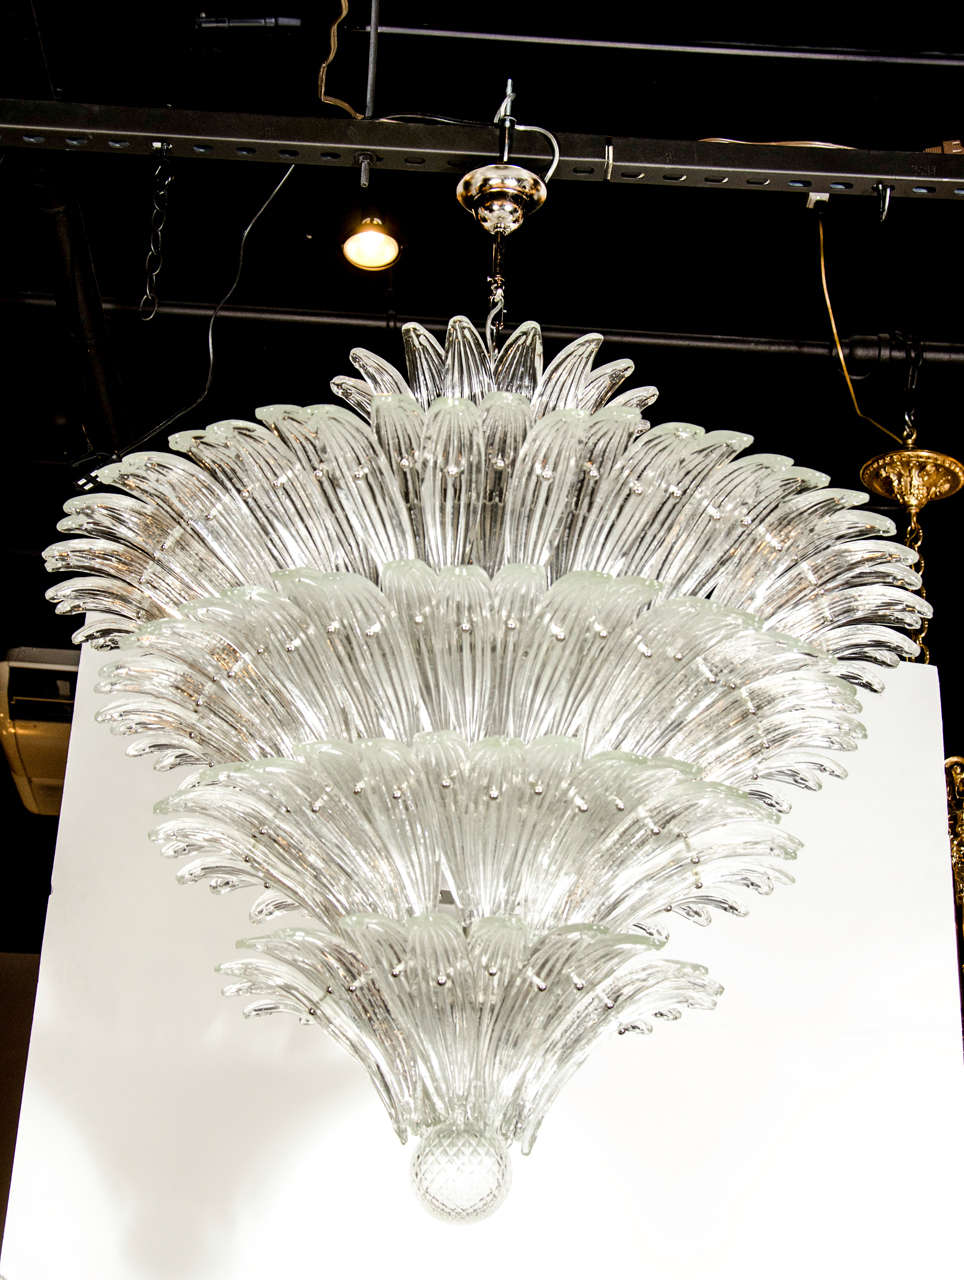 This exquisite “Palma” chandelier was realized in Murano, Italy- the island off the coast of Venice renowned for centuries for its superlative glass production. It consists of five tiers of handblown translucent Murano glass in the form of stylized